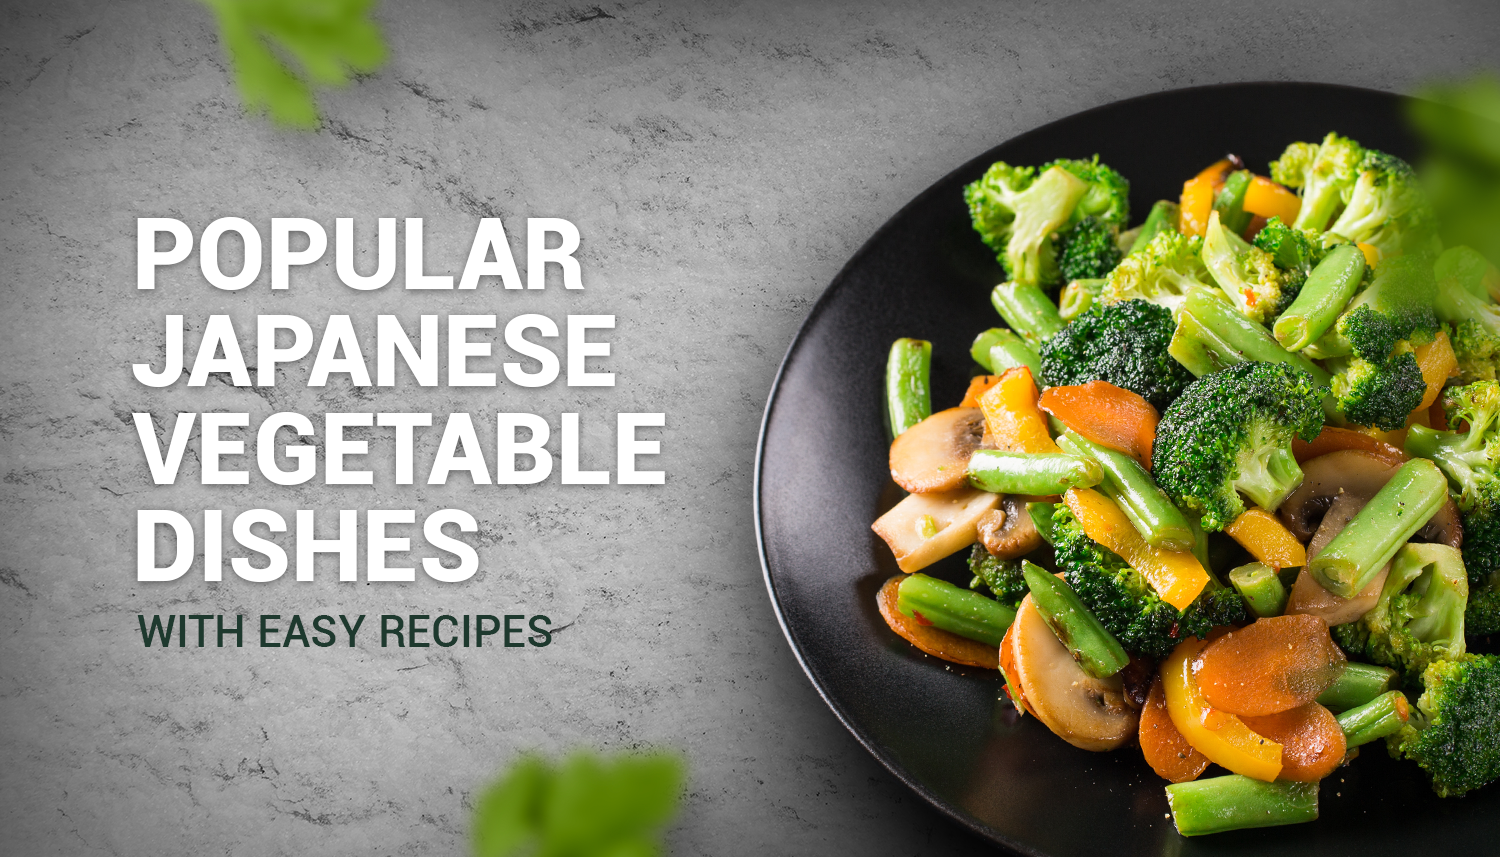 Top 5 Popular Japanese Vegetable Dishes With Easy Recipes